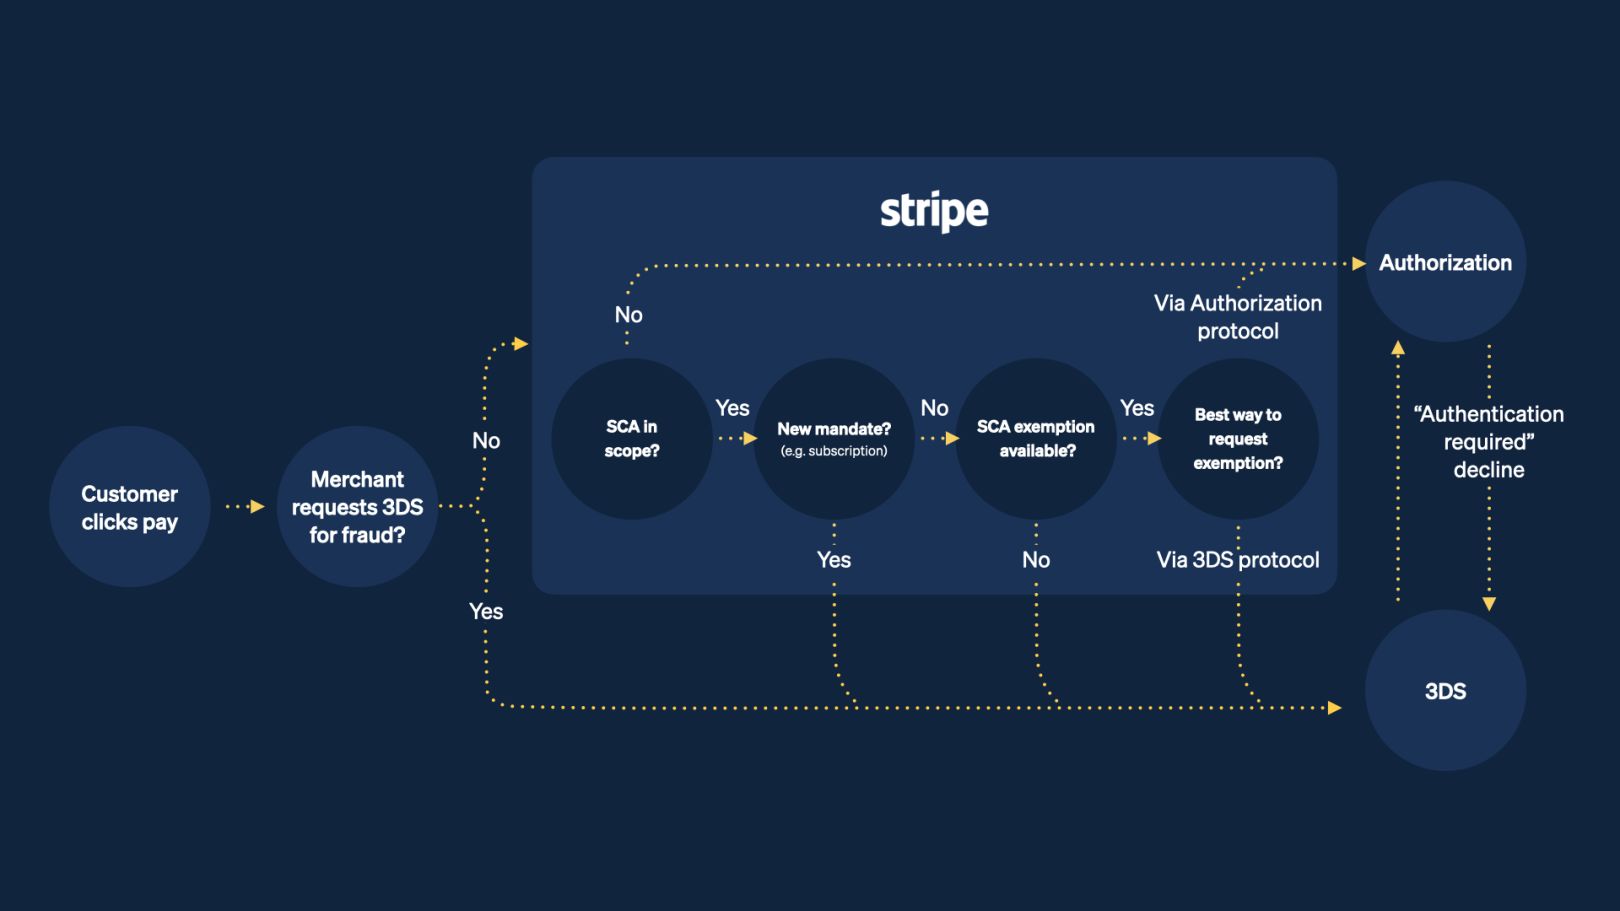 Stripe’s Strong Customer Authentication engine